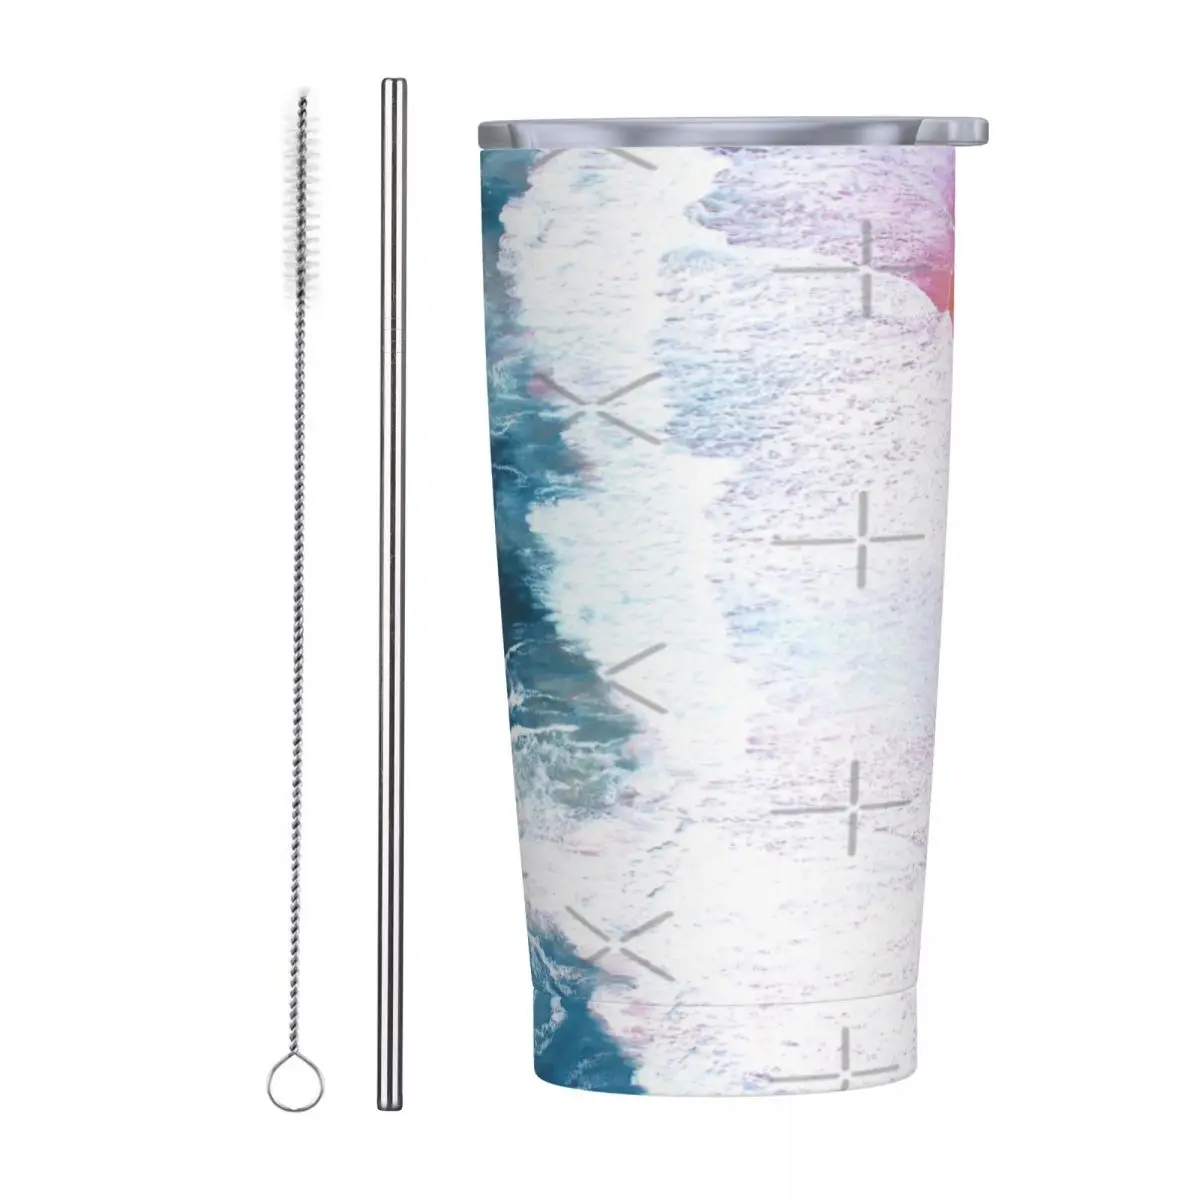 

Aerial Beach, Ocean Waves Stainless Steel Mug Environmentally Friendly easy to use With straw brush Reusable